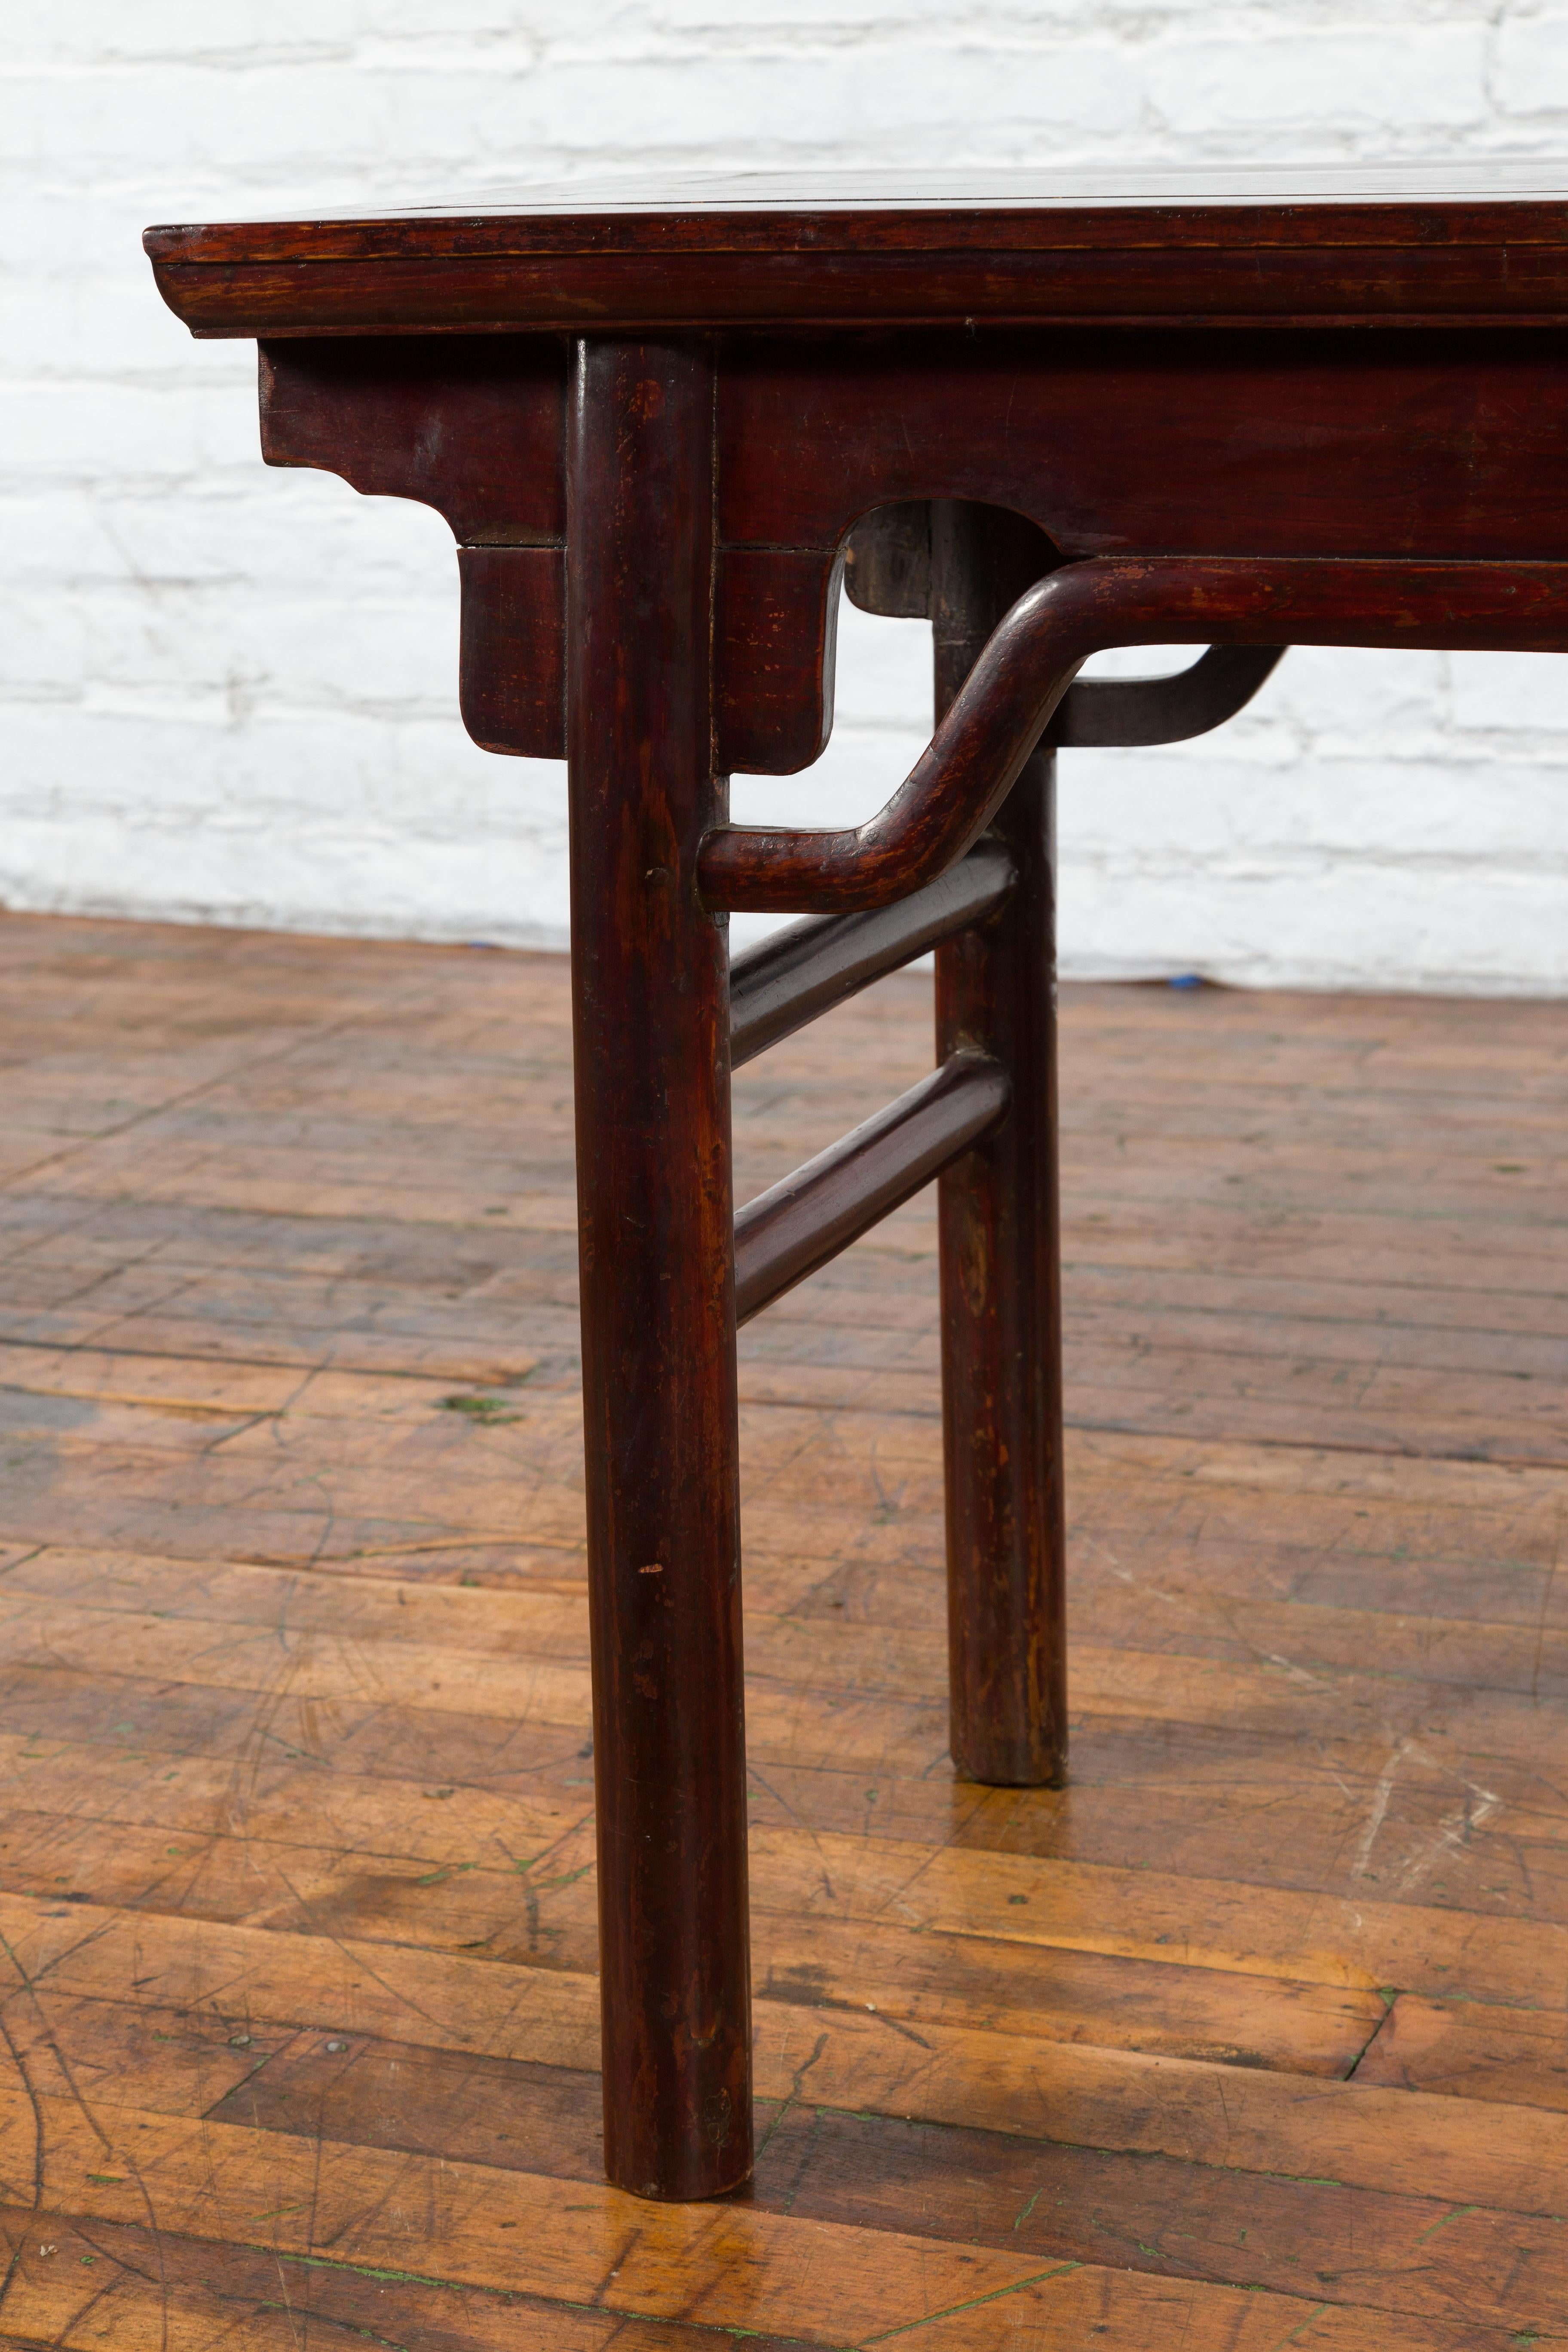 Chinese 19th Century Qing Dynasty Altar Console Table with Humpback Stretchers For Sale 3